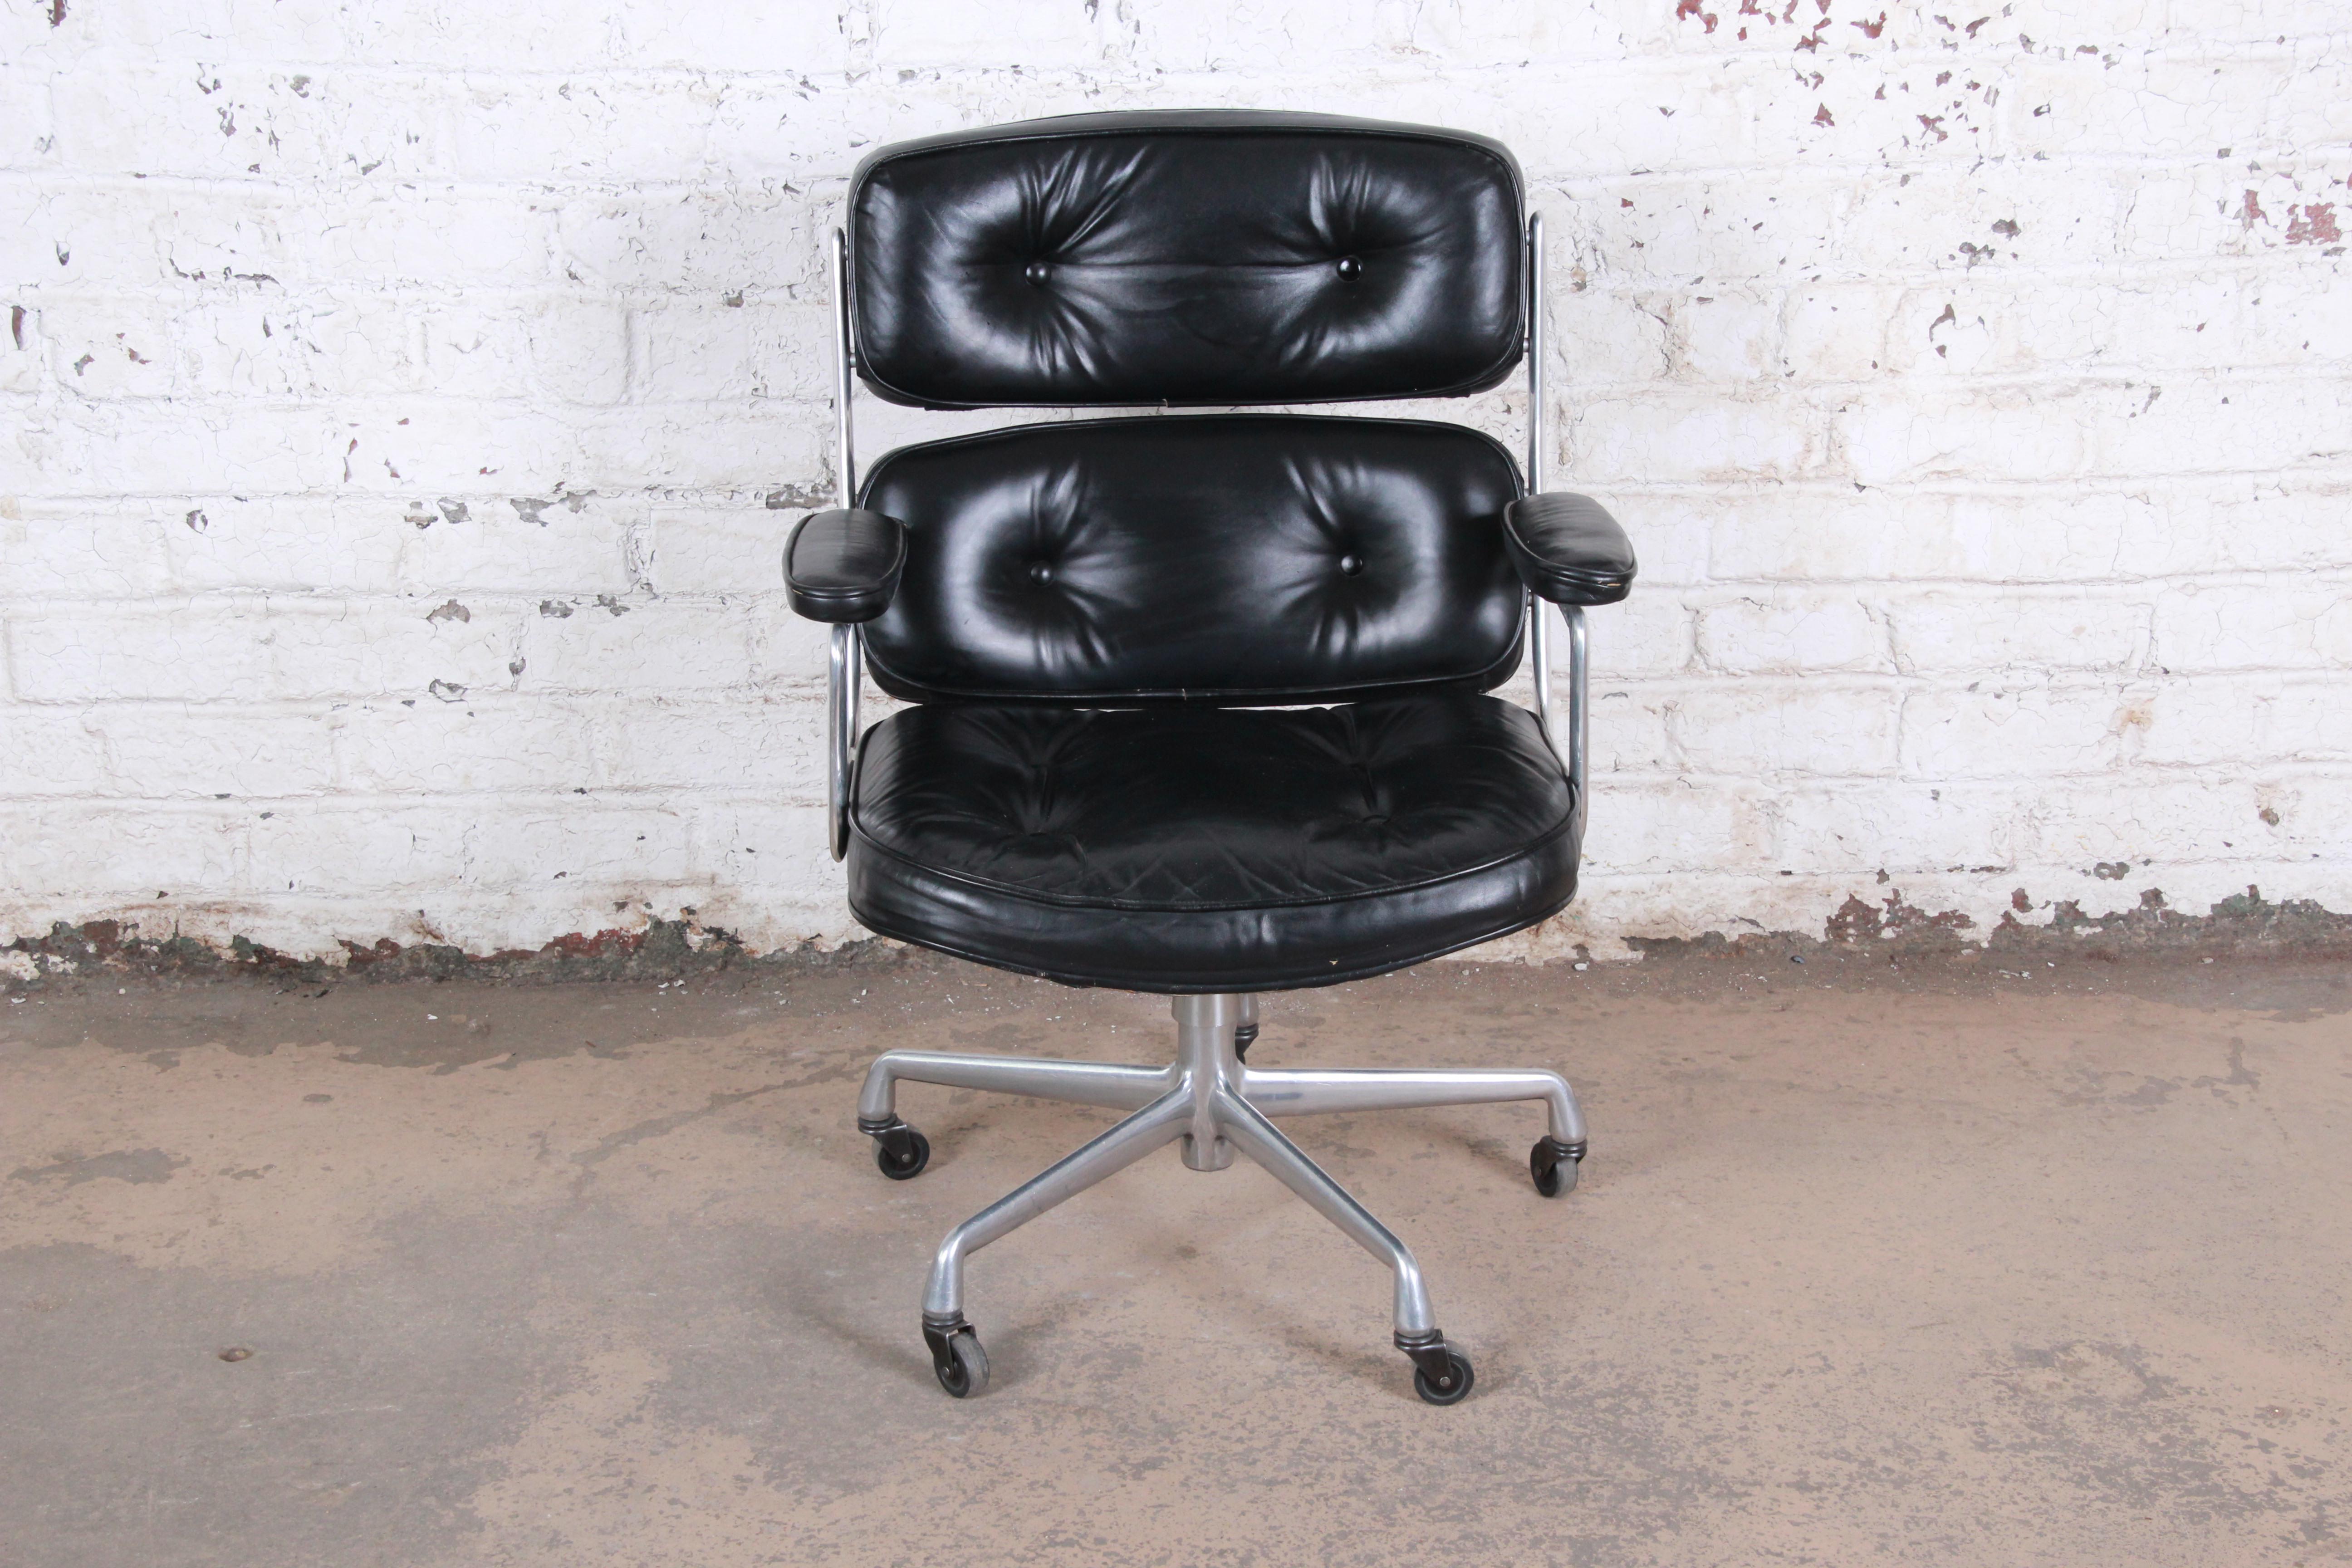 An iconic and timeless piece of American history, Charles Eames designed this chair for the Time Life building in New York City in 1959. Combining style and comfort, this chair features original tufted black leather upholstery, with padded armrests